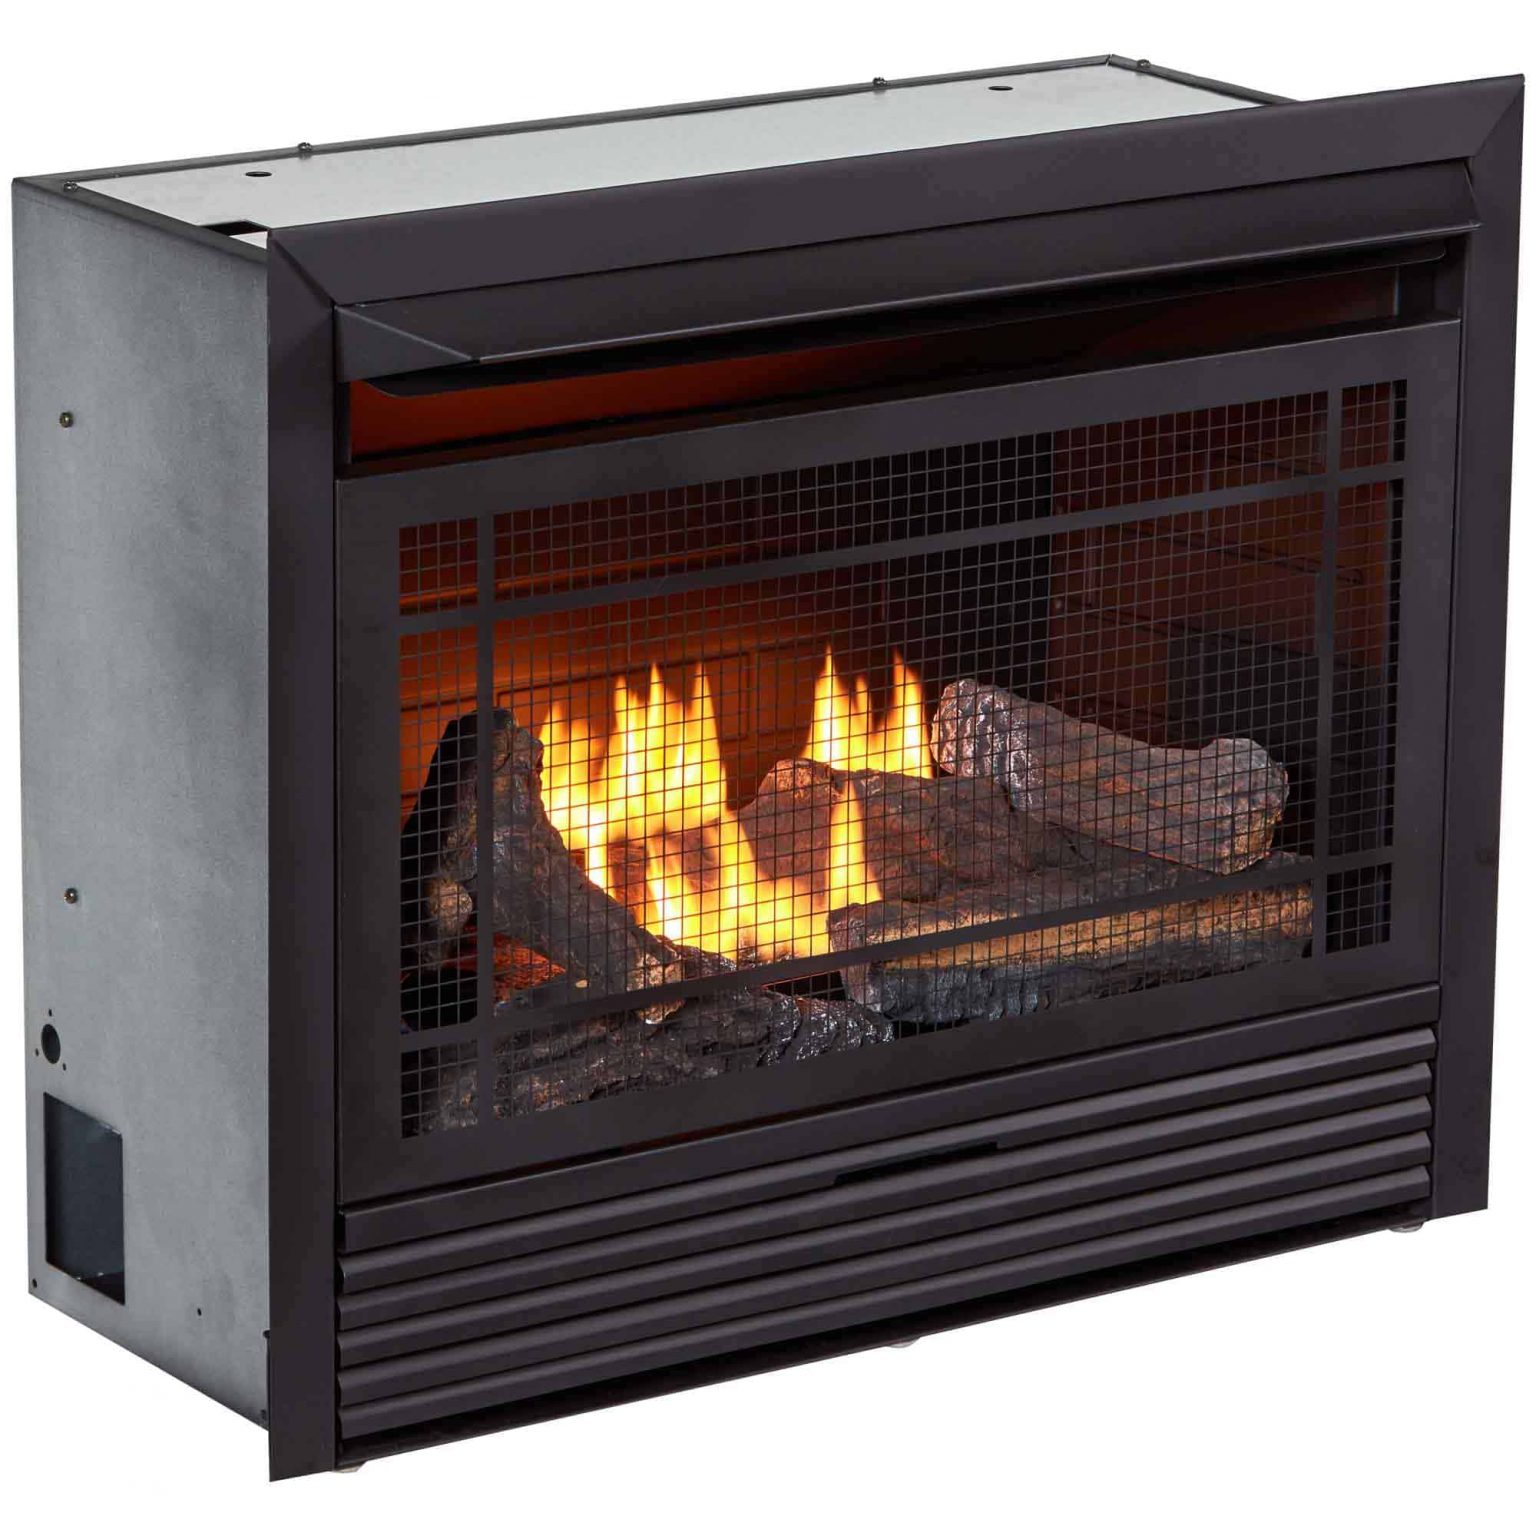 Duluth Forge Dual Fuel Ventless Fireplace Insert 26000 BTU T Stat Control 1536x1536 